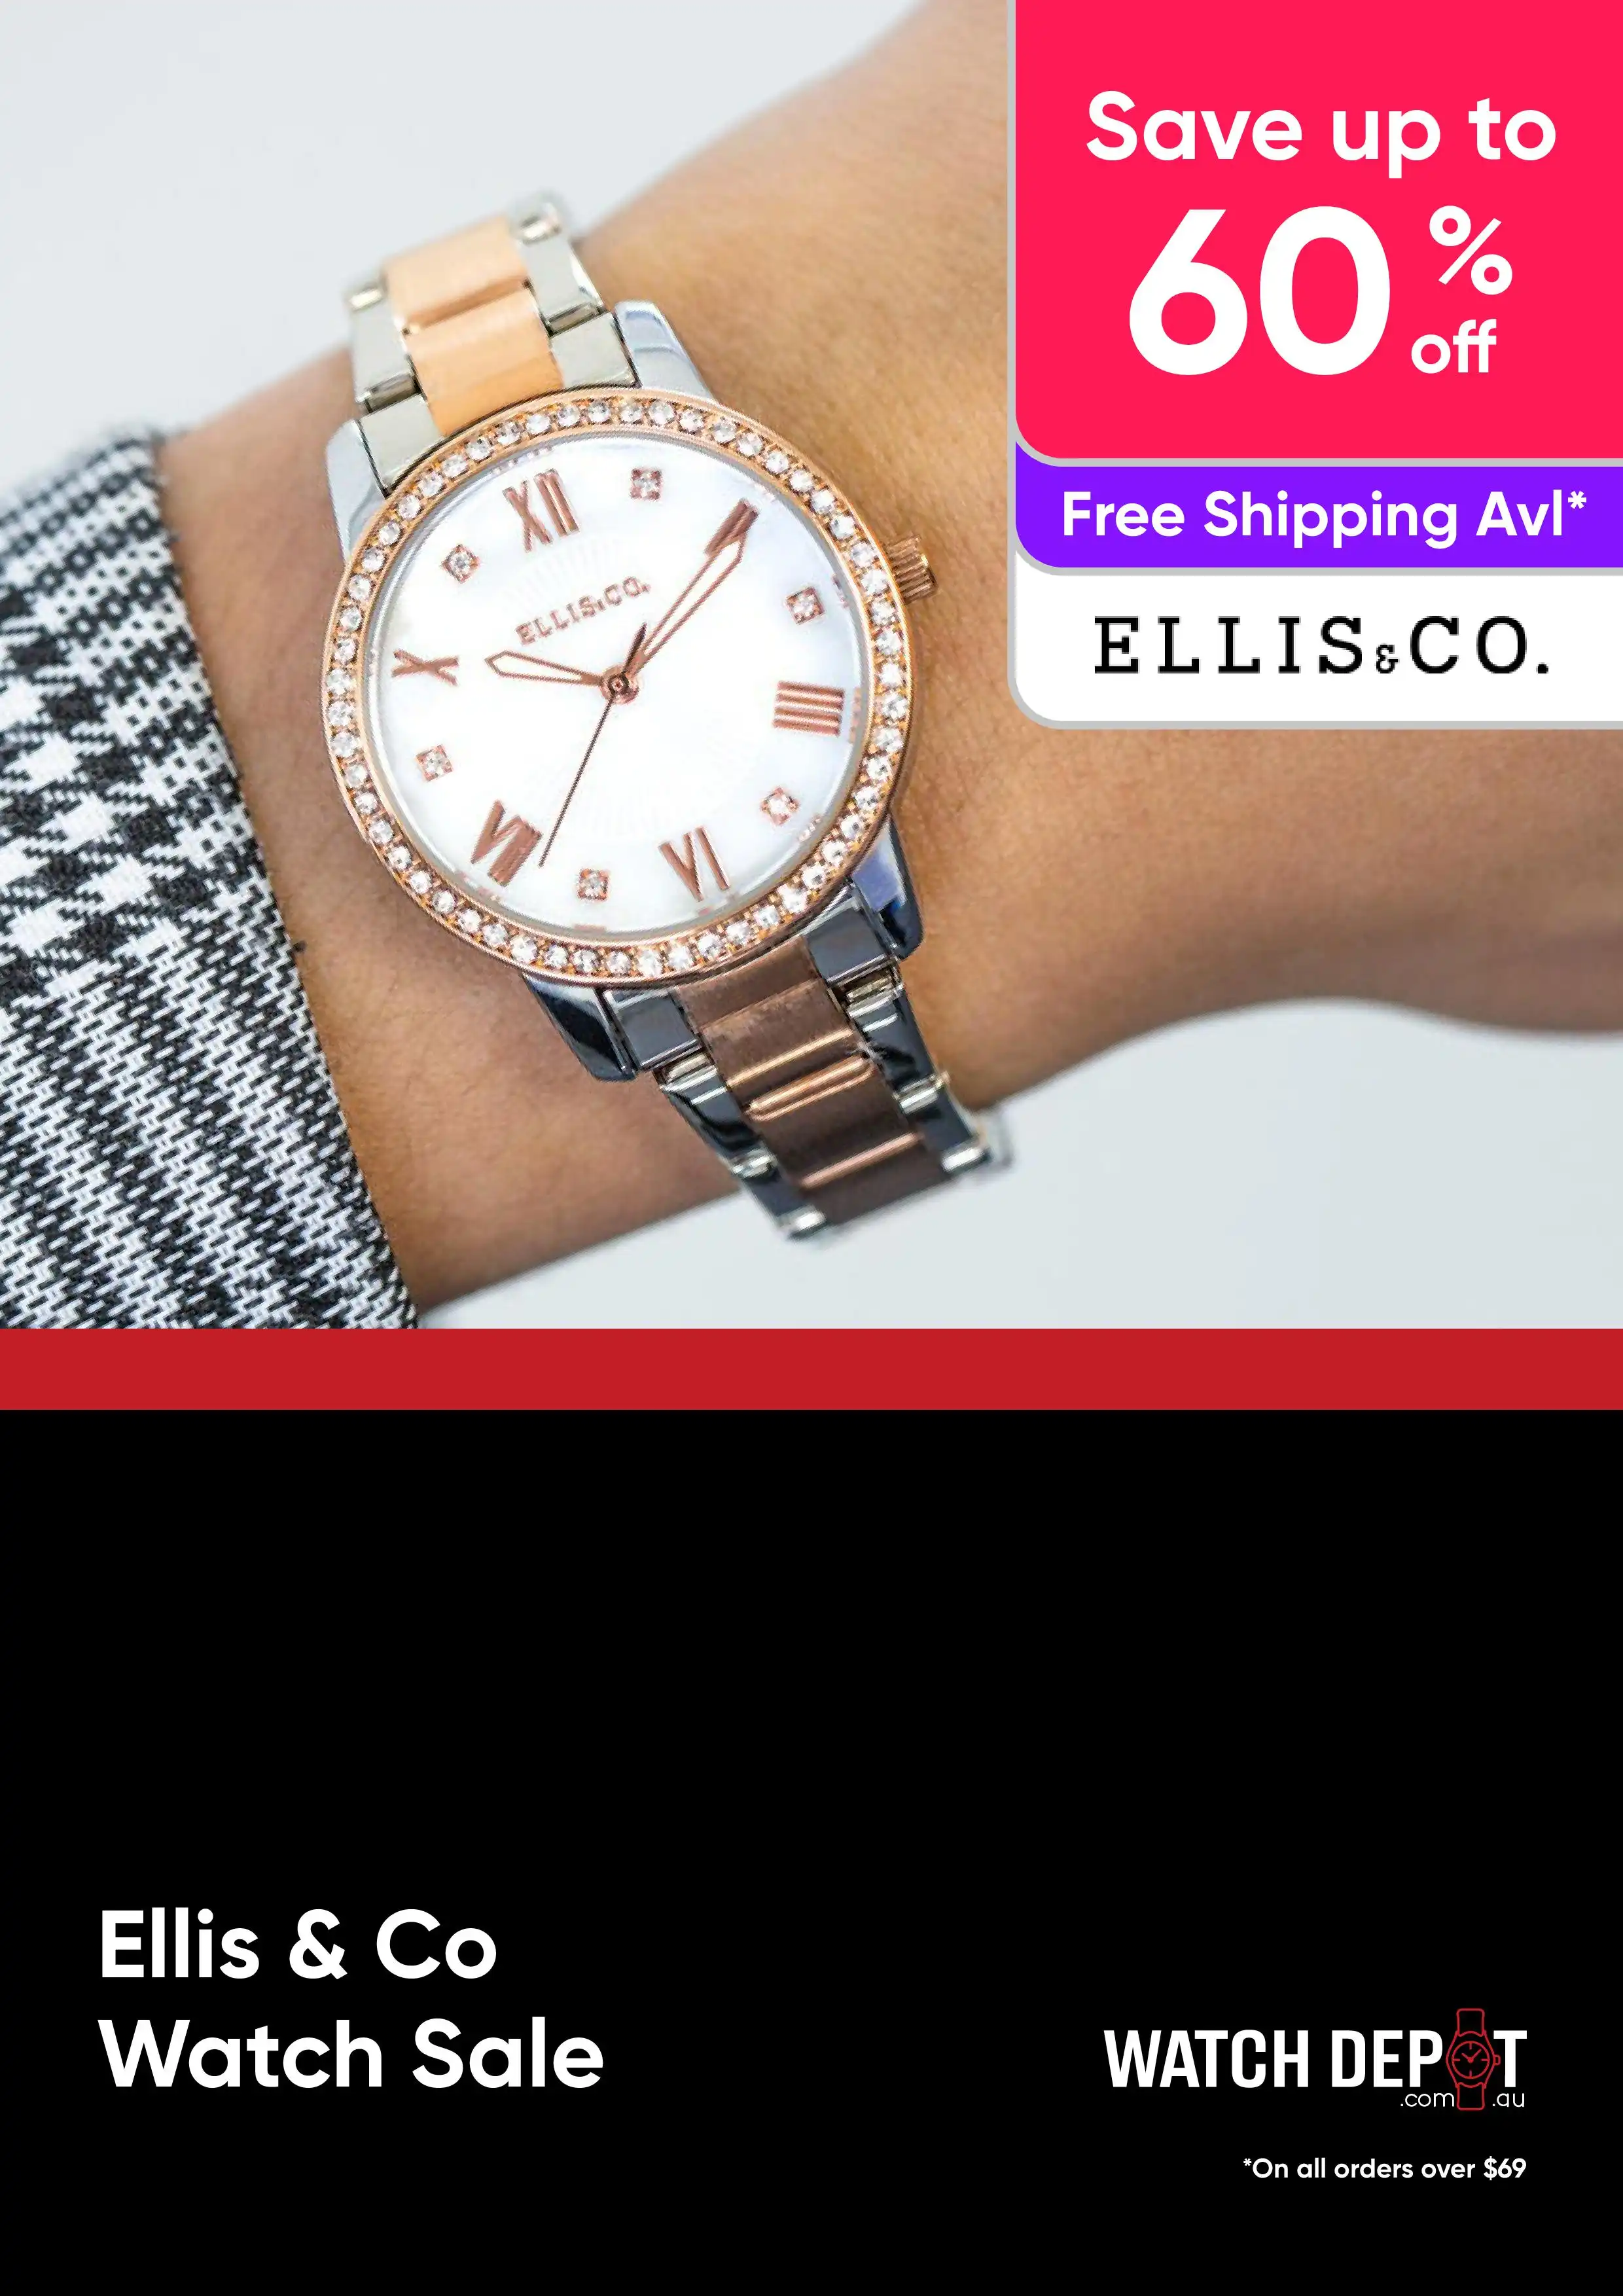 Ellis & Co Watch Sale - Up to 60% off